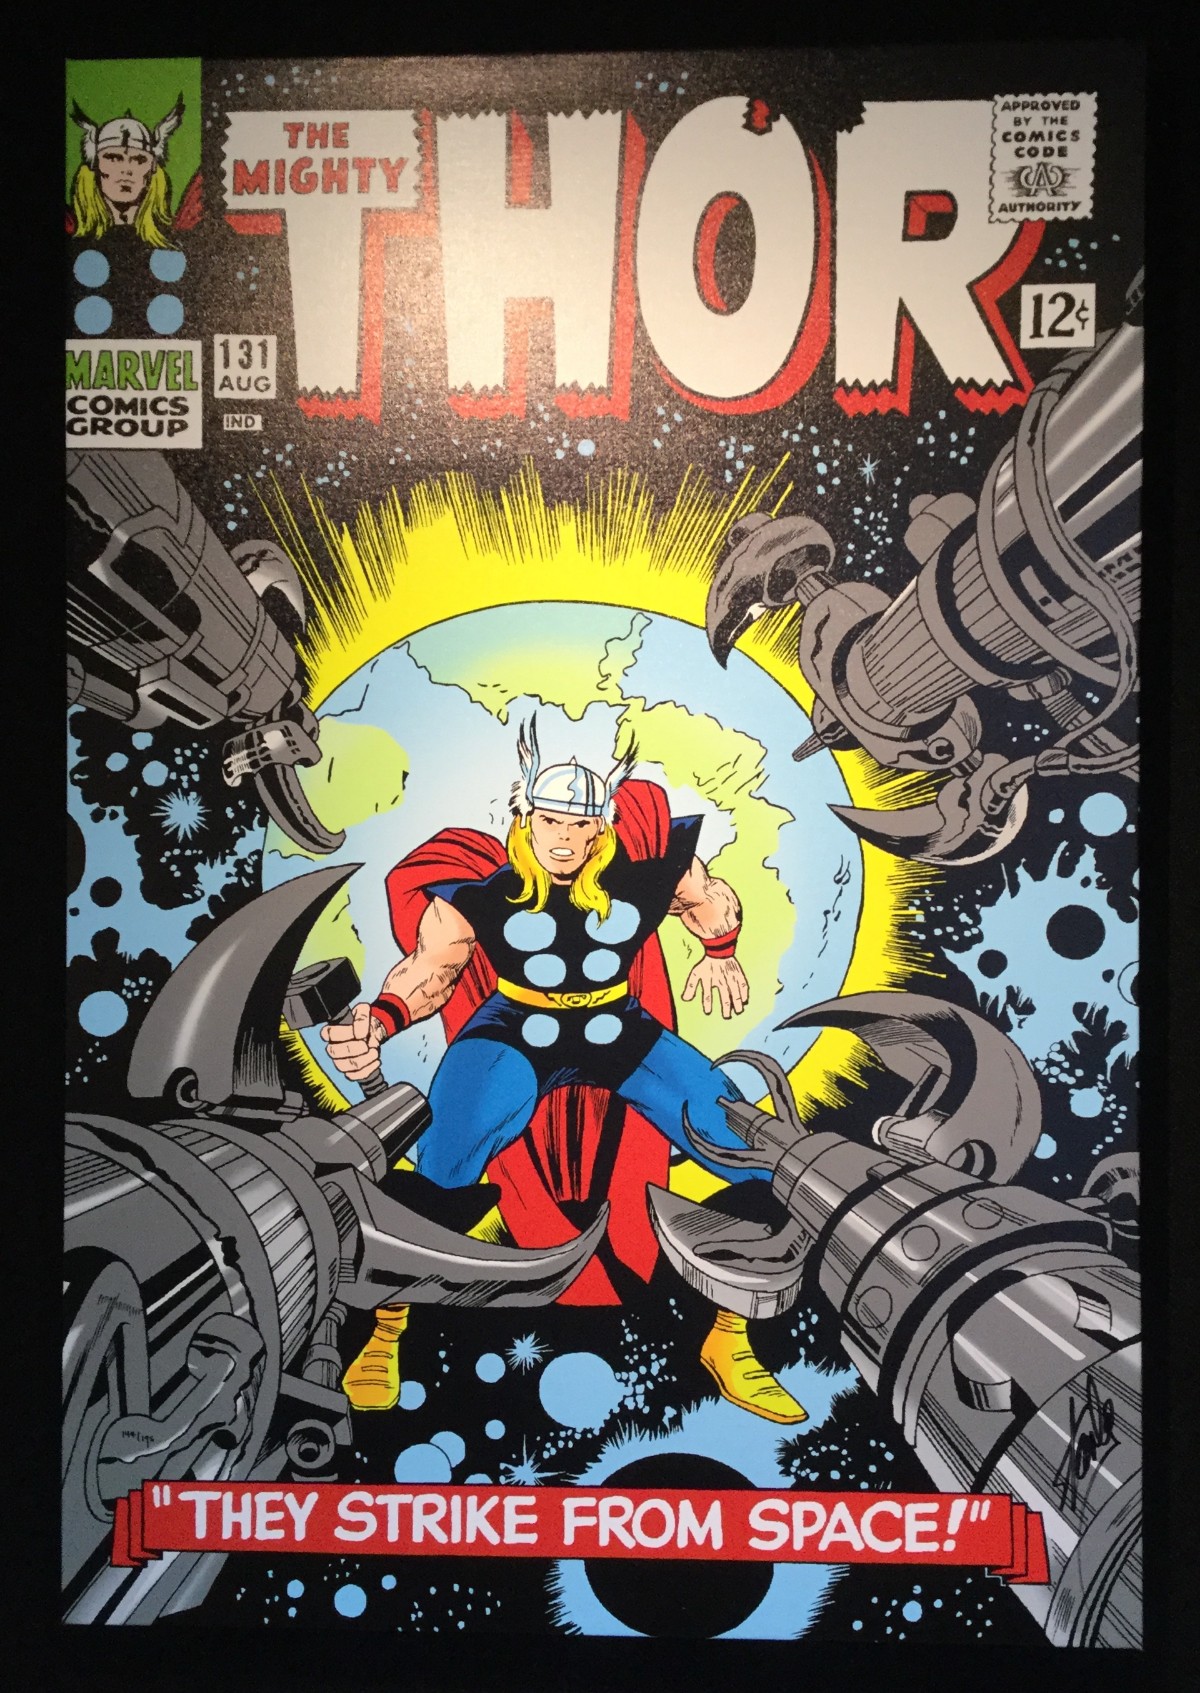 The Mighty Thor #131 - They Strike from Space! by Marvel Comics - Stan Lee